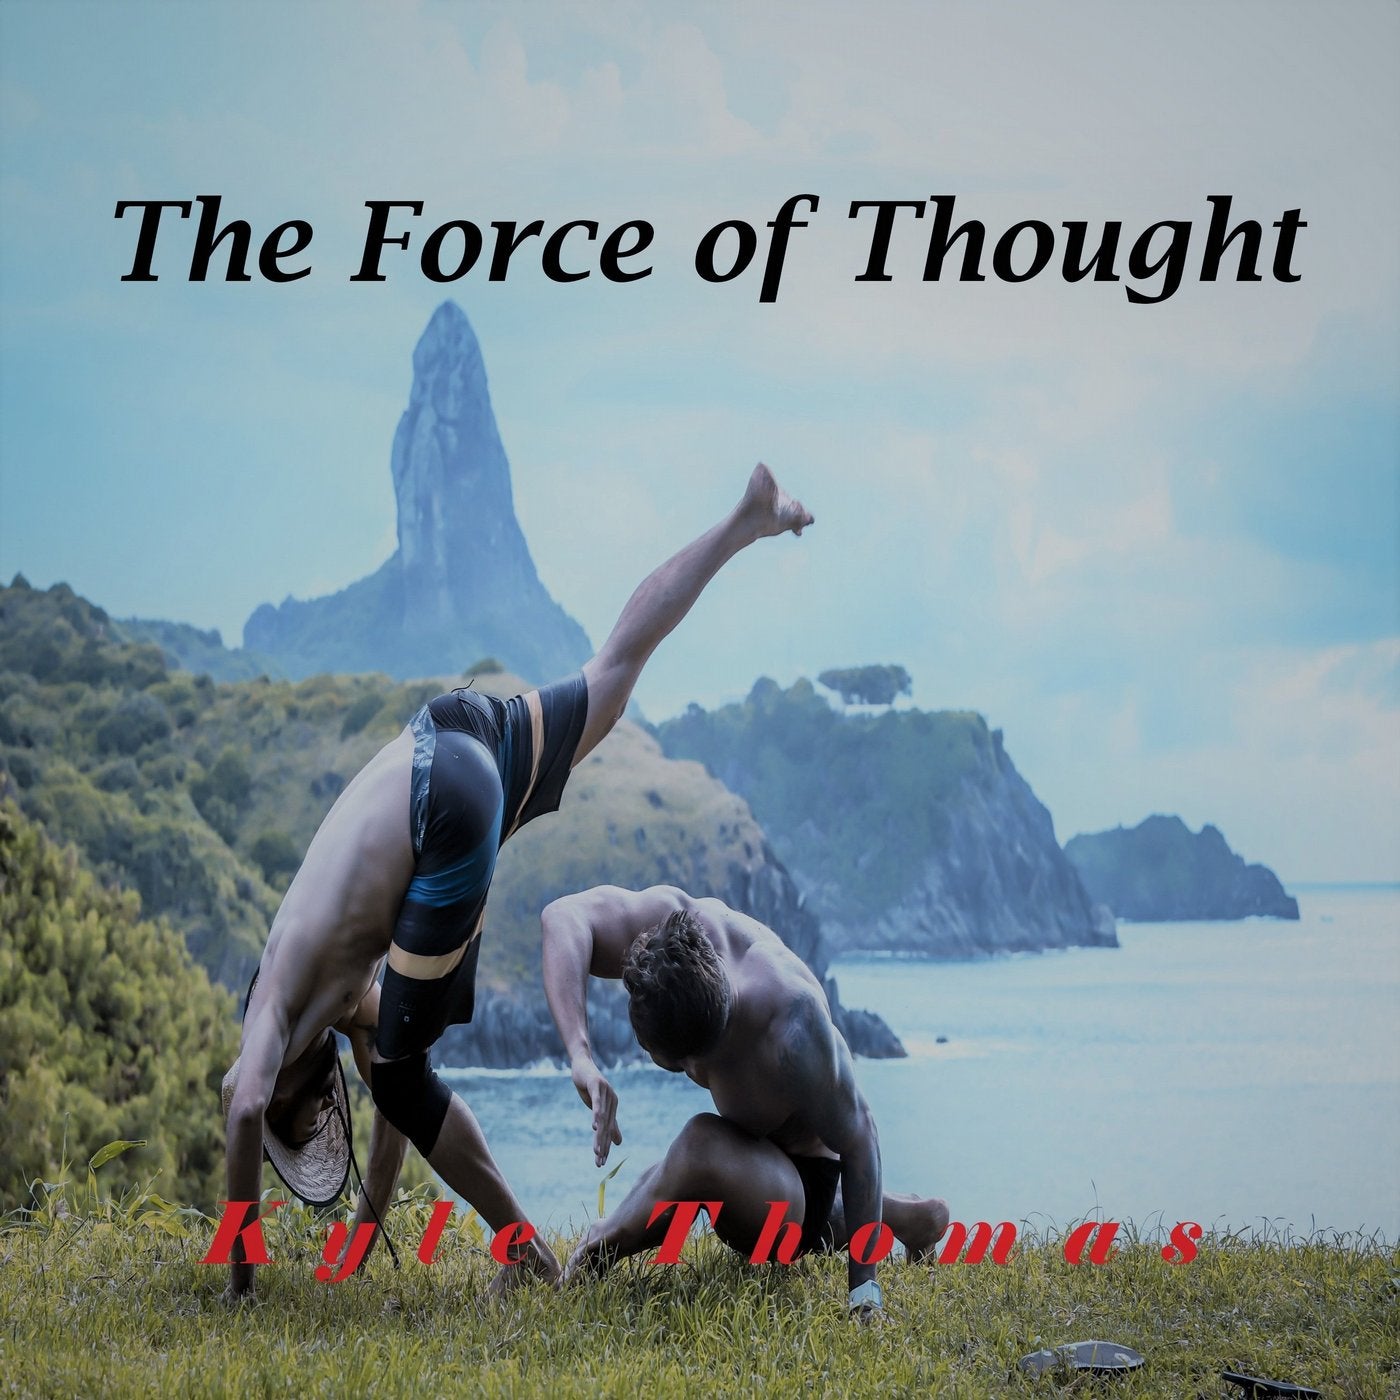 The Force of Thought